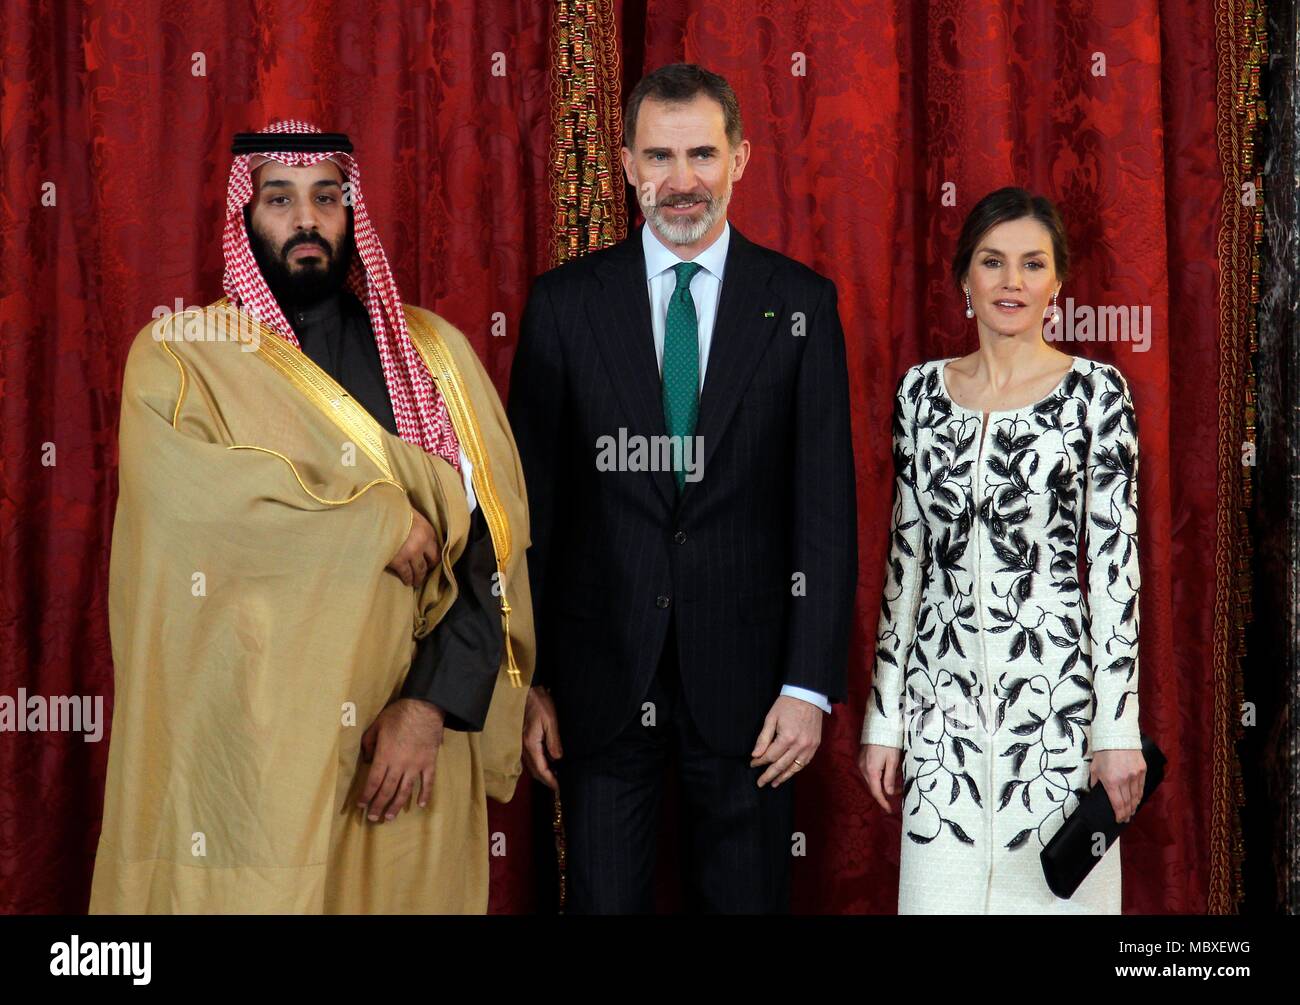 The Kings of Spain, Felipe VI and Letizia, offer a lunch to Crown ...